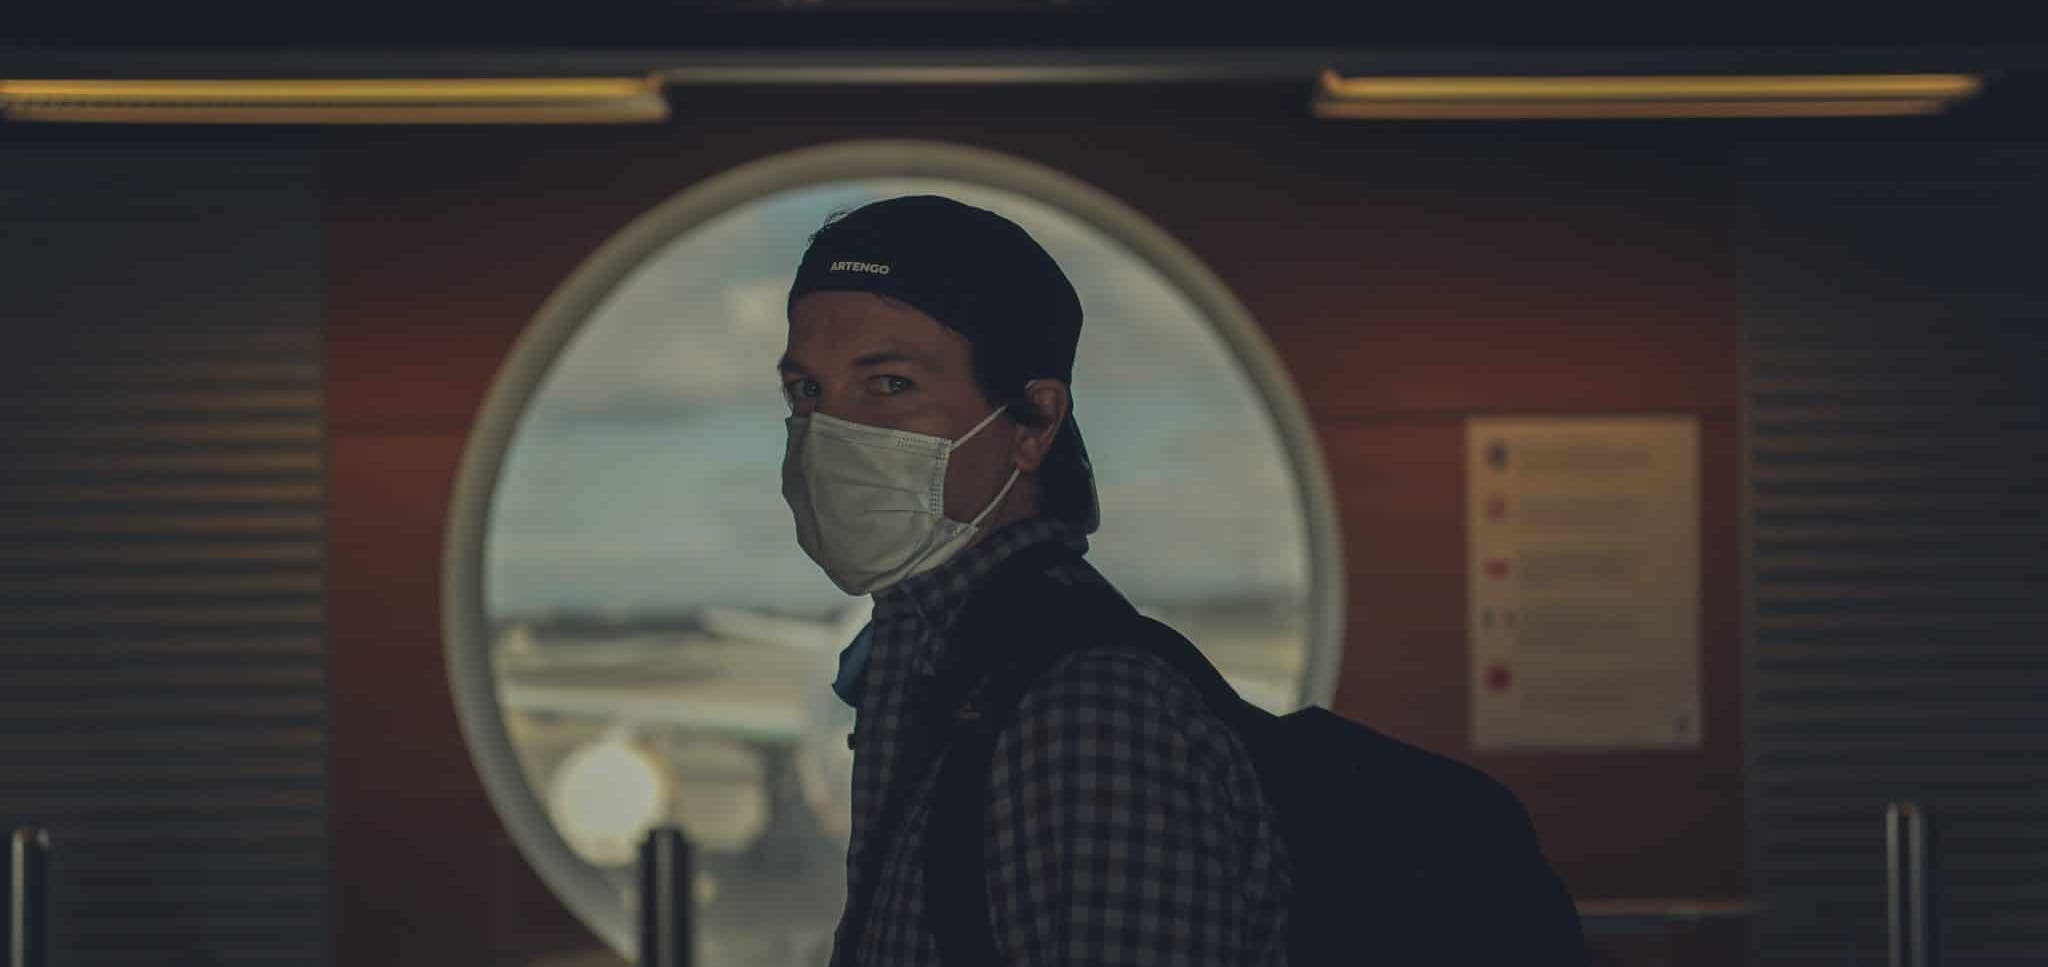 traveller wearing a mask at an airport